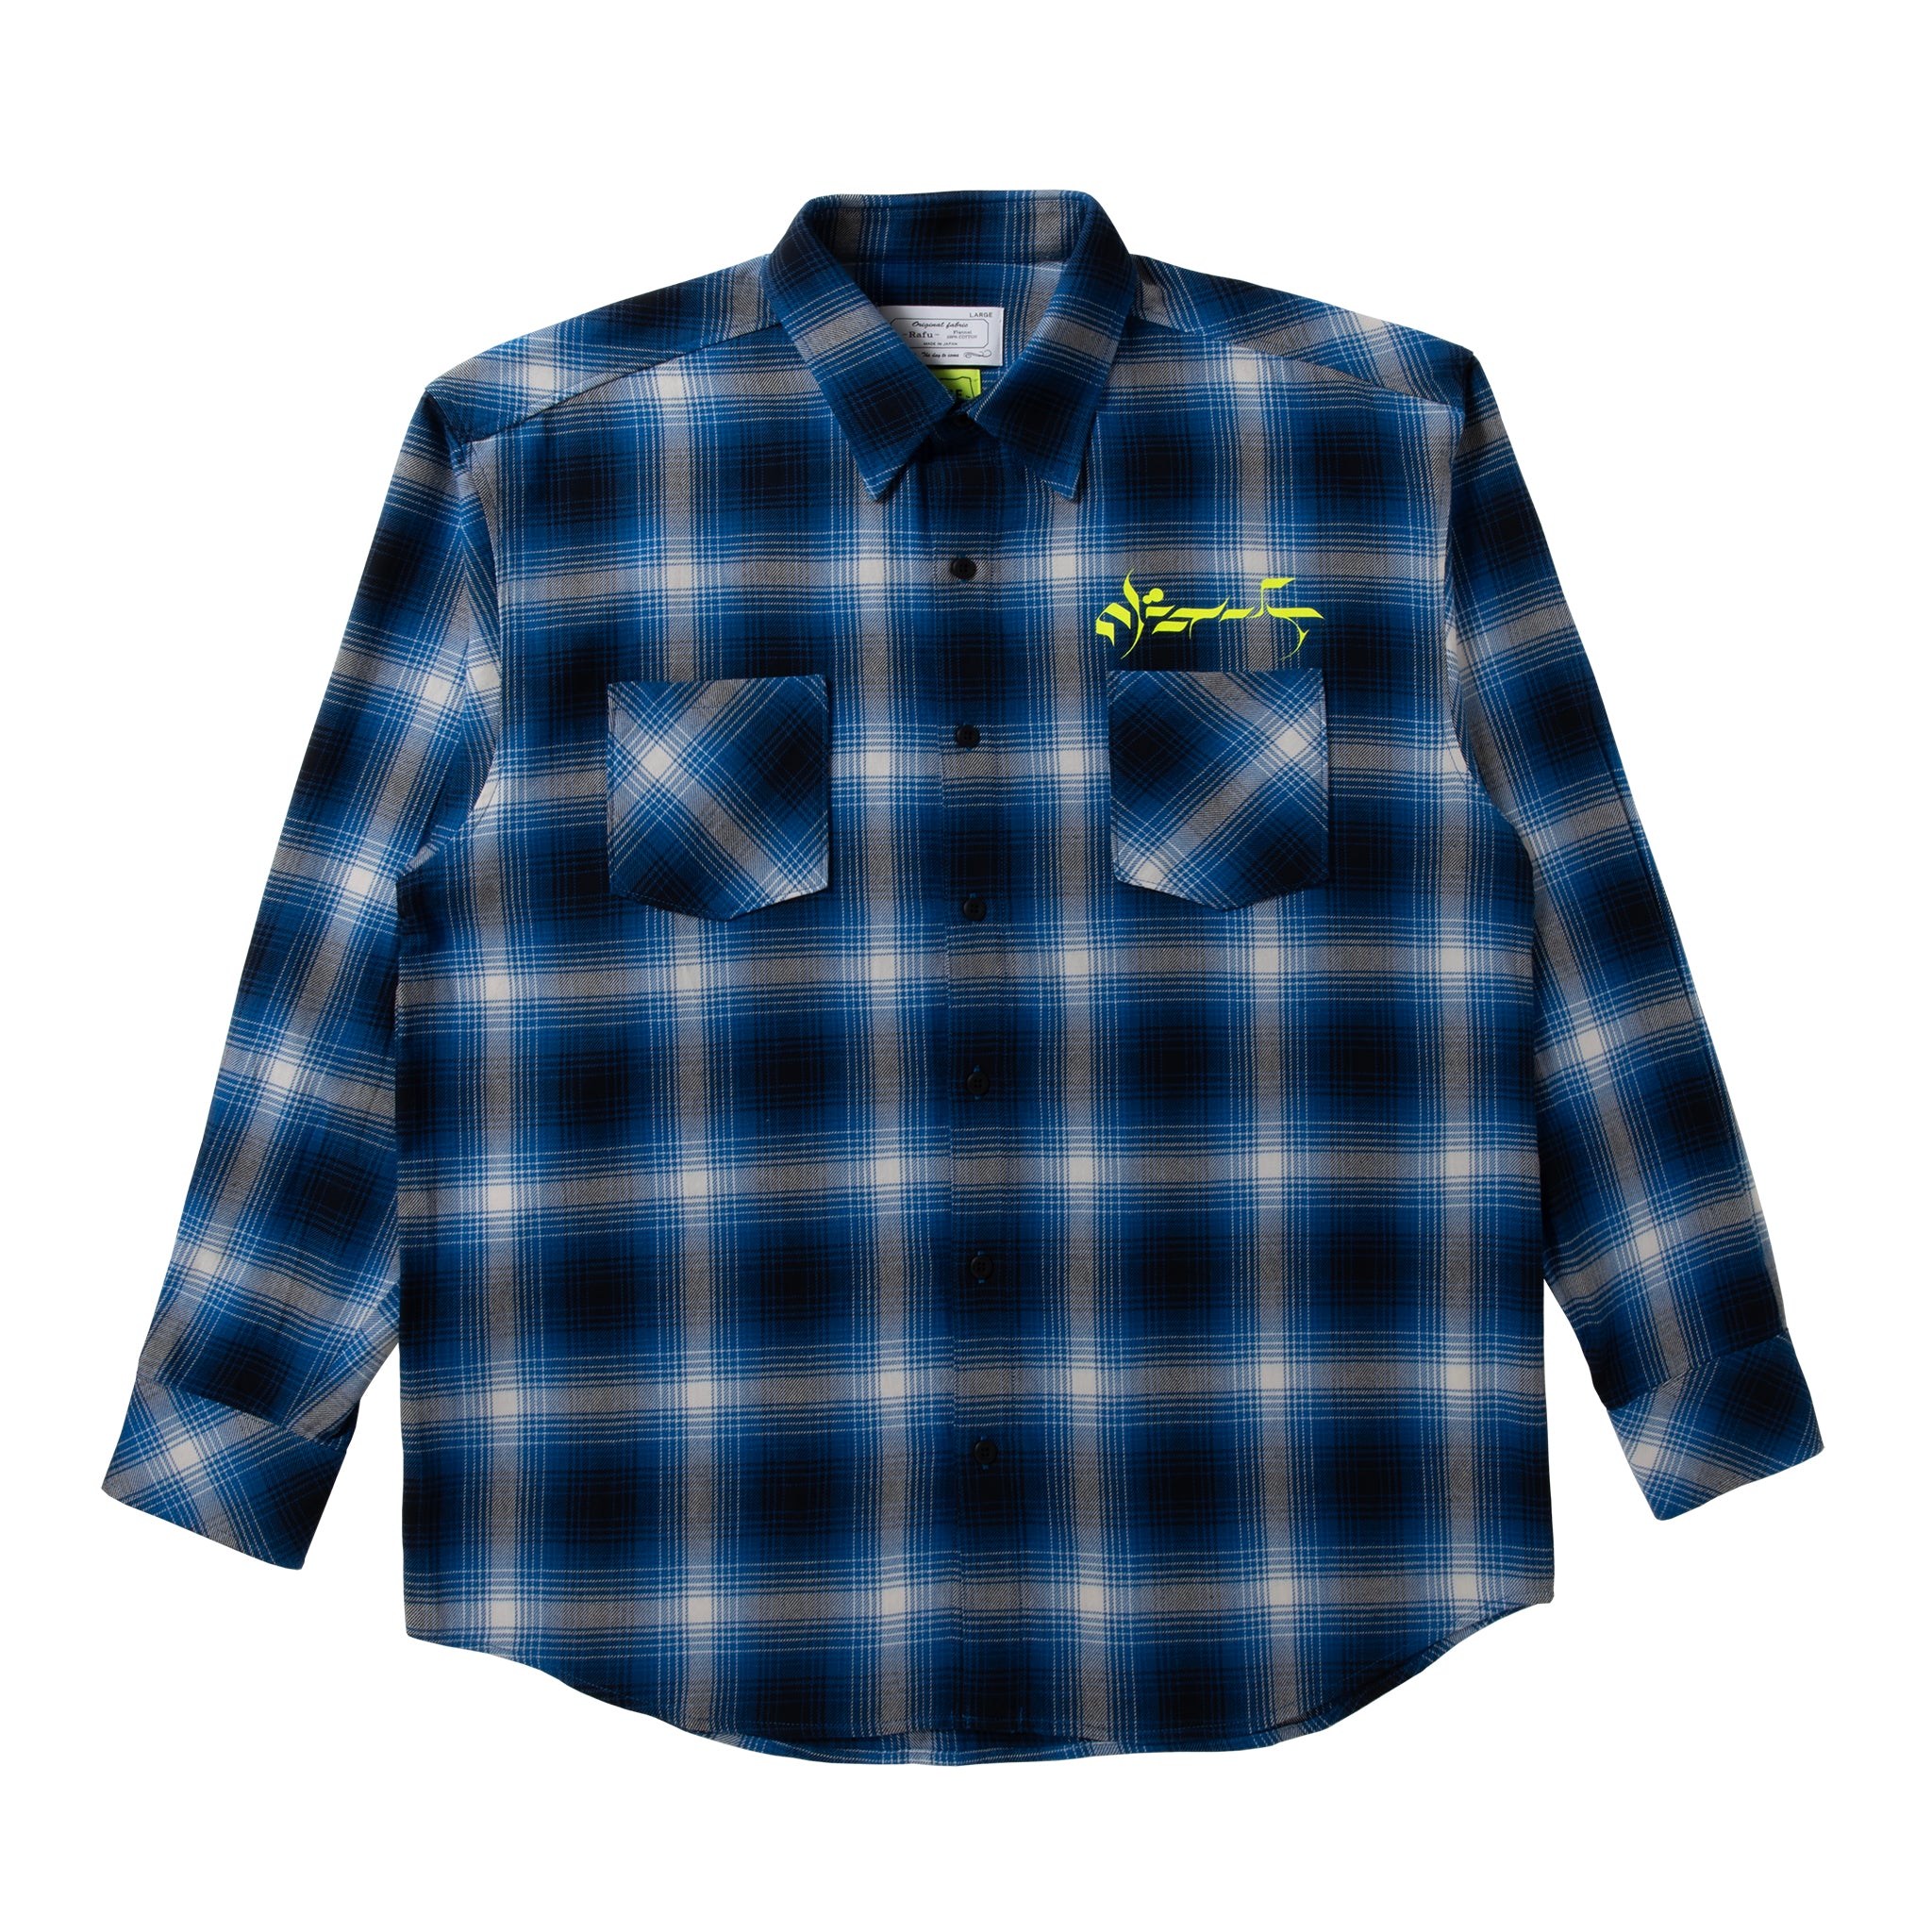 loosejoints≒RAFU - GUCCIMAZE - 'Joints' Fluo printed Flannel shirt (Blue)